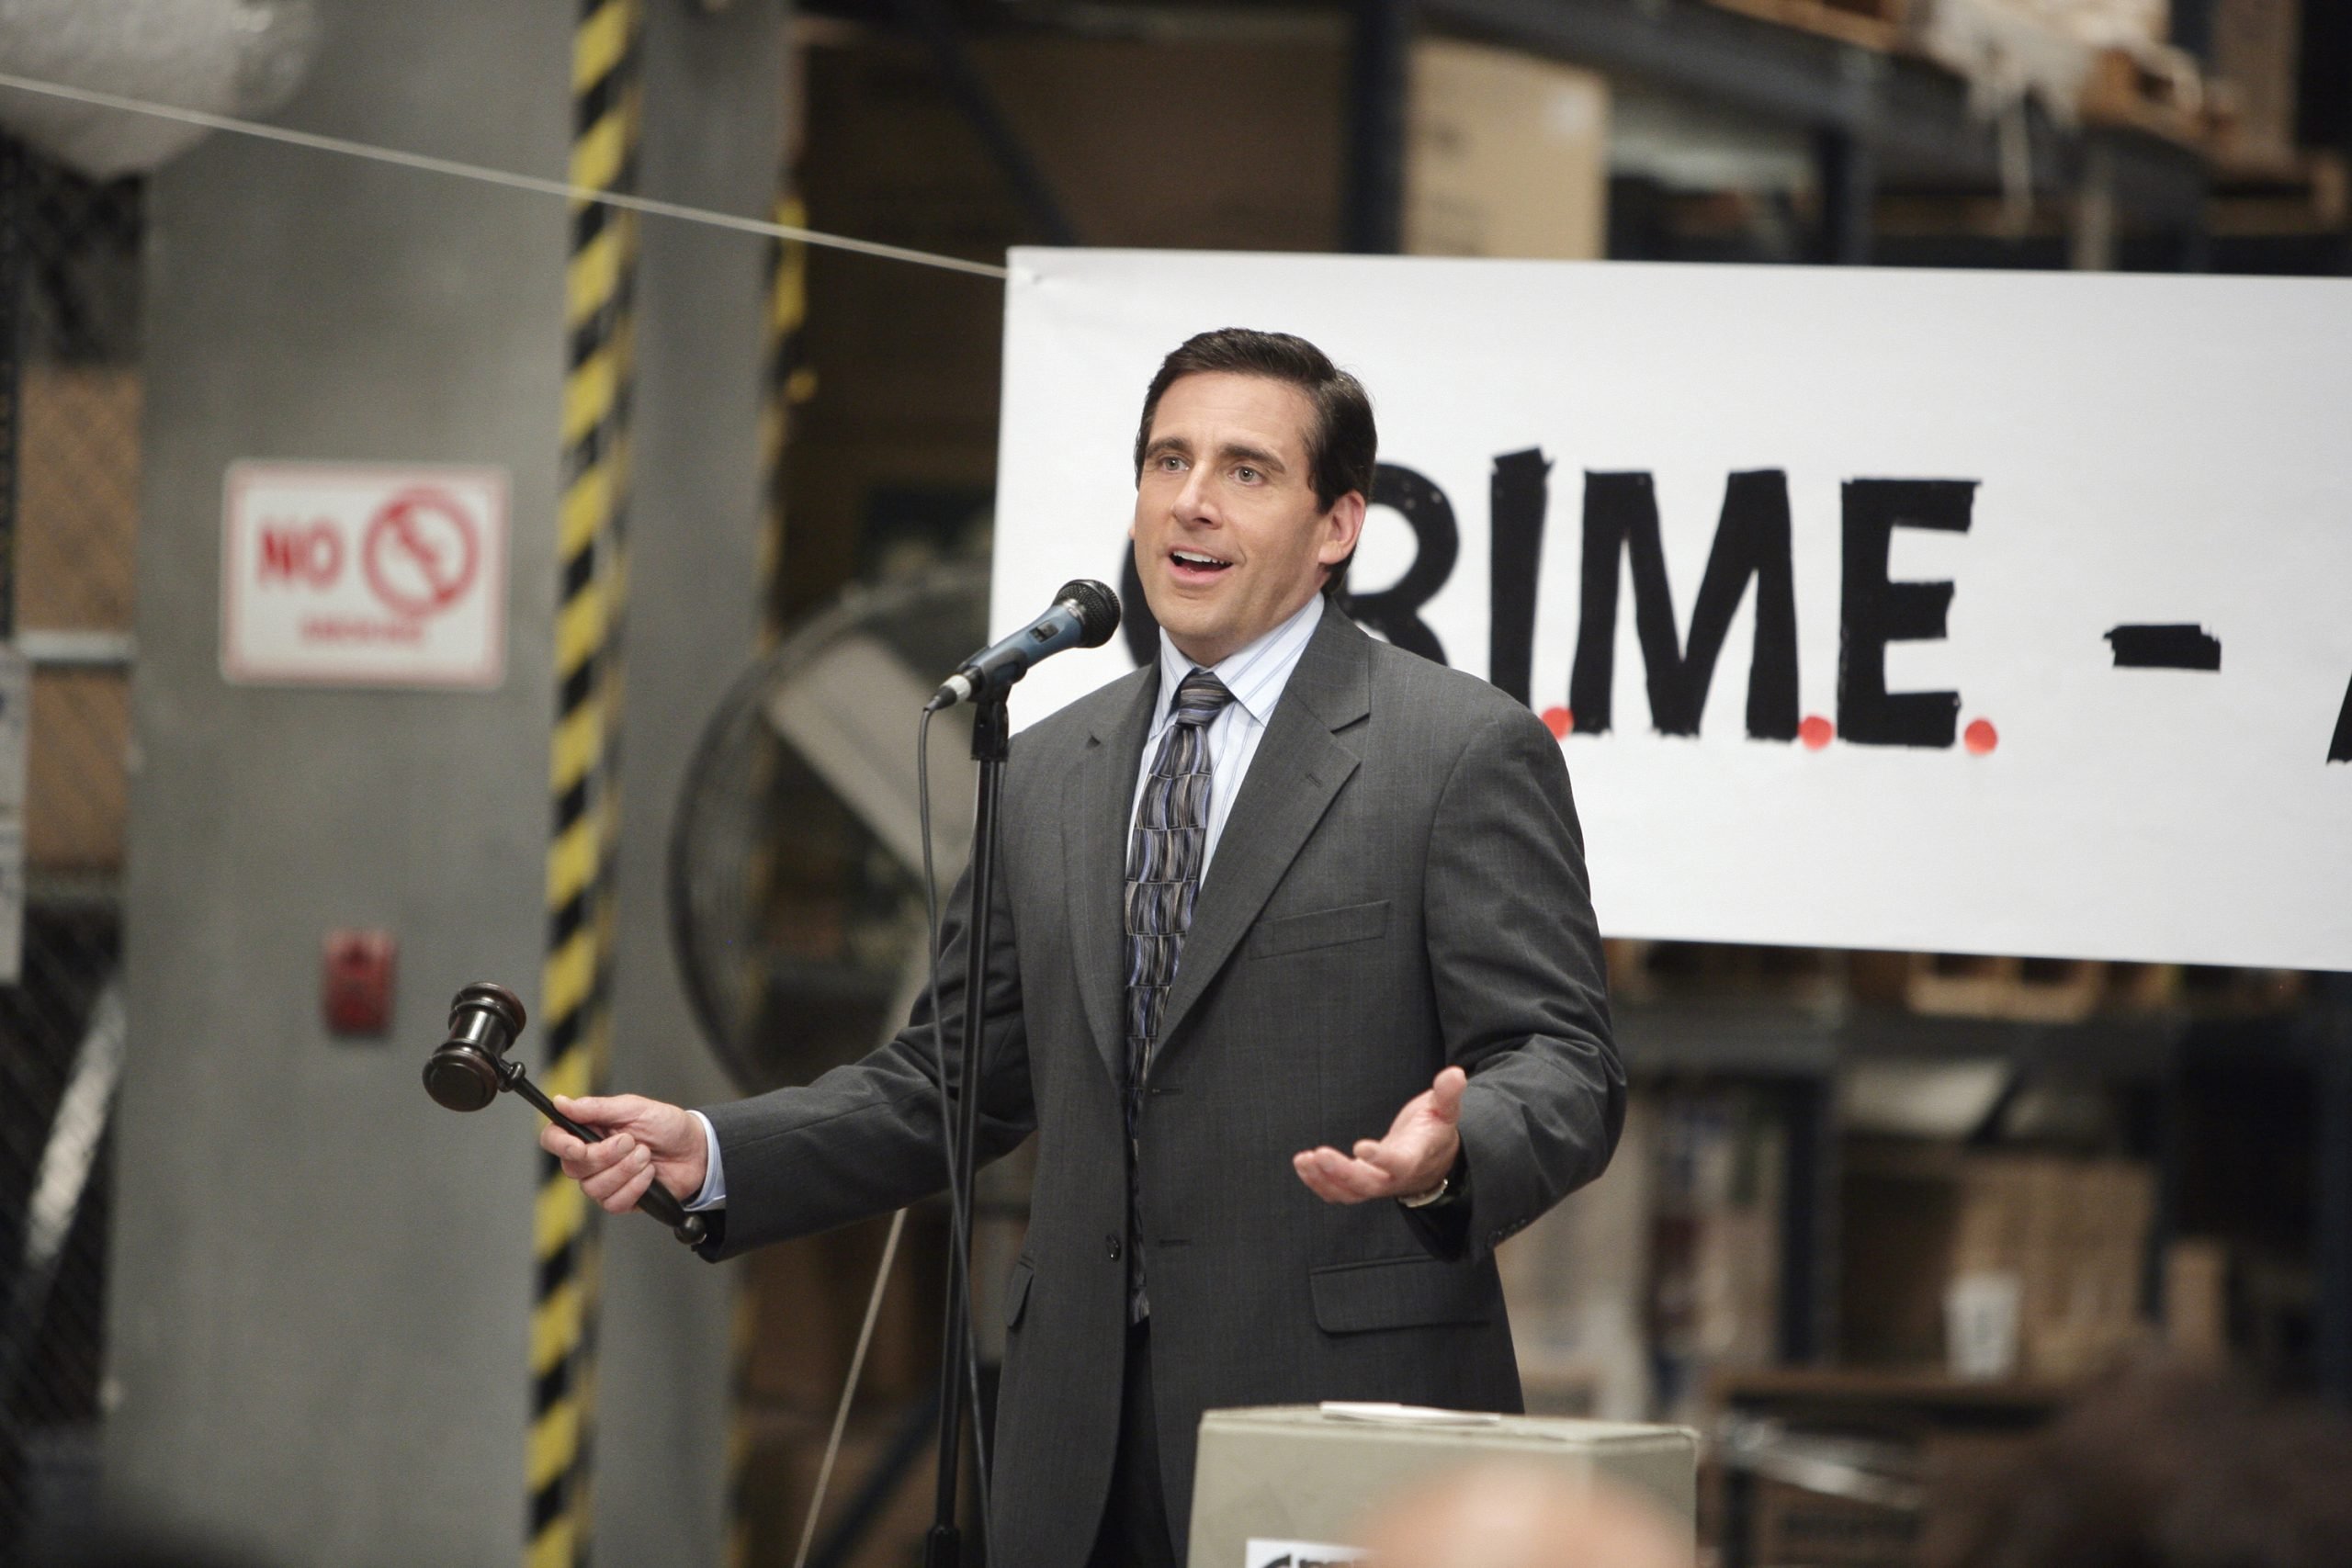 Steve Carell as Michael Scott on 'The Office' | Mitch Haddad/NBCU Photo Bank/NBCUniversal via Getty Images via Getty Images